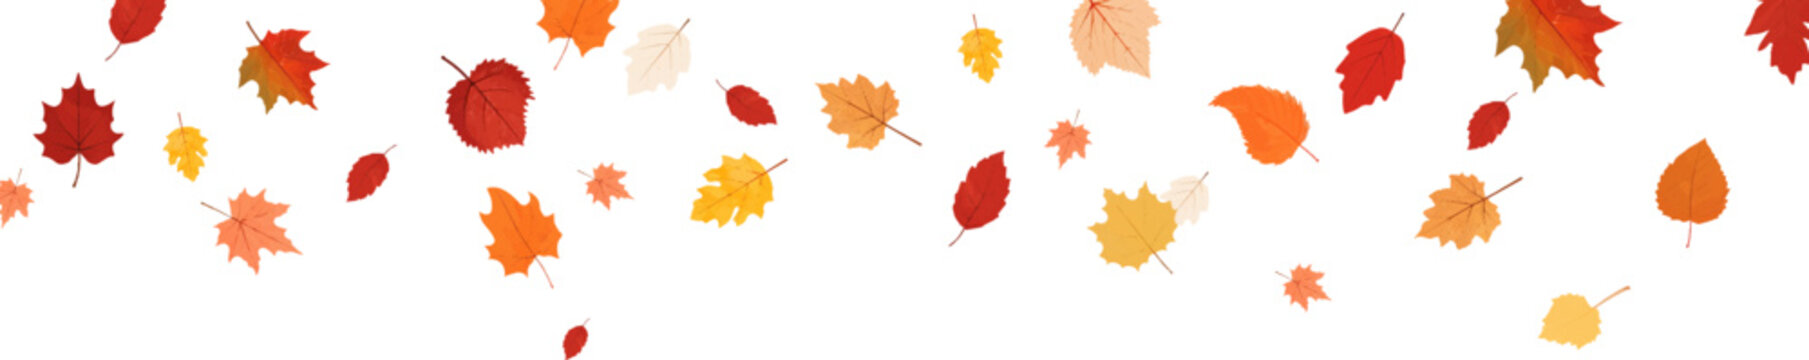 Autumn leaf border.Falling leaves.Leaf fall.Autumn flying leaves.Watercolor leaves in the wind.Autumn leaves seamless border.